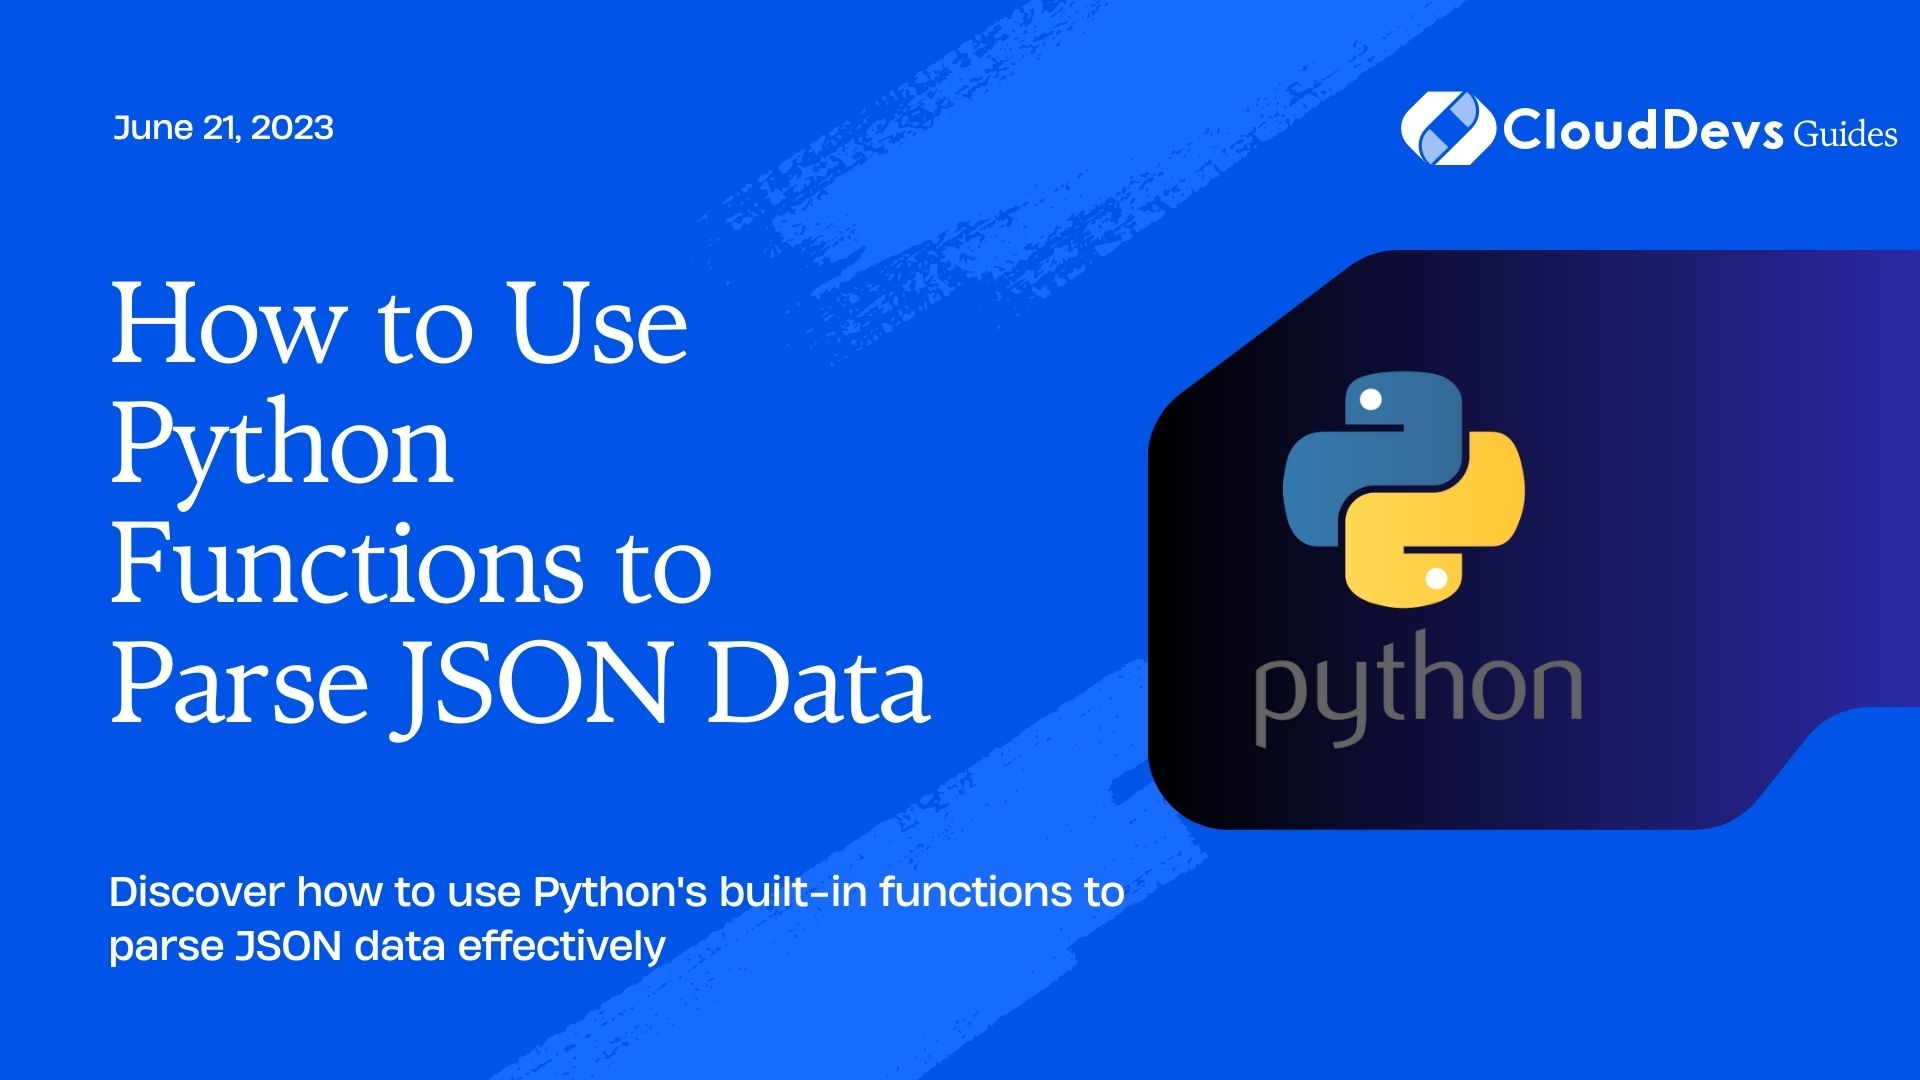 How to Use Python Functions to Parse JSON Data